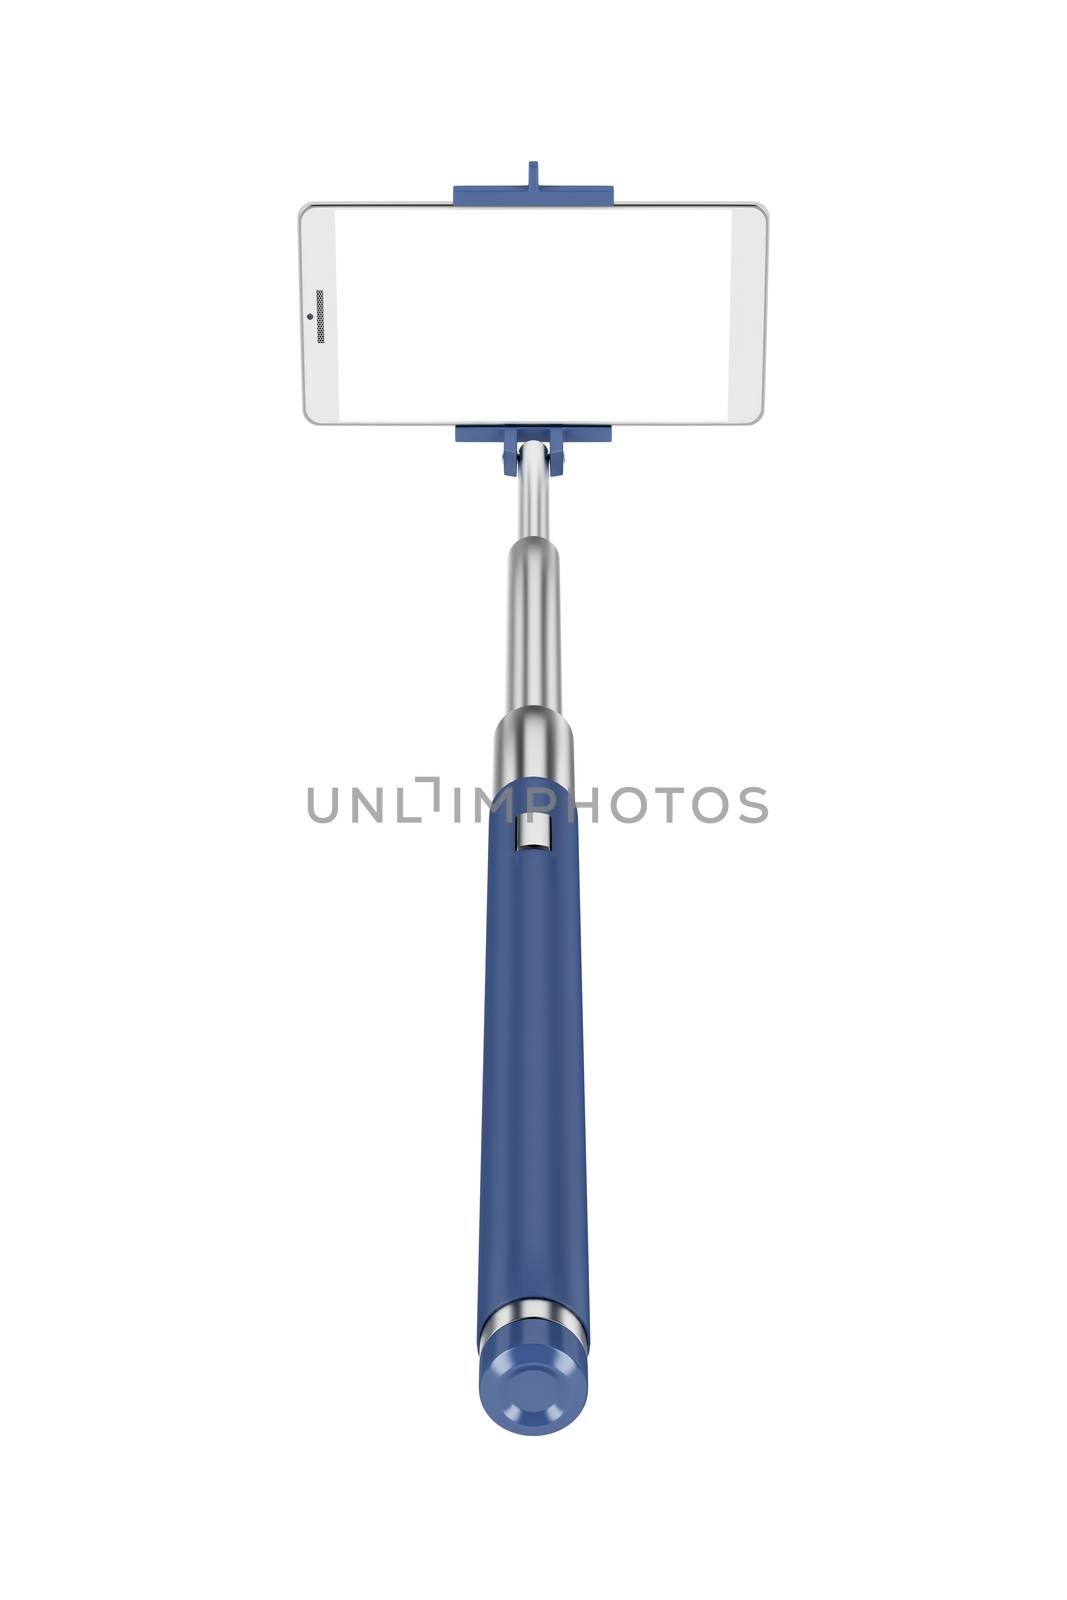 Selfie stick and smart phone, isolated on background 